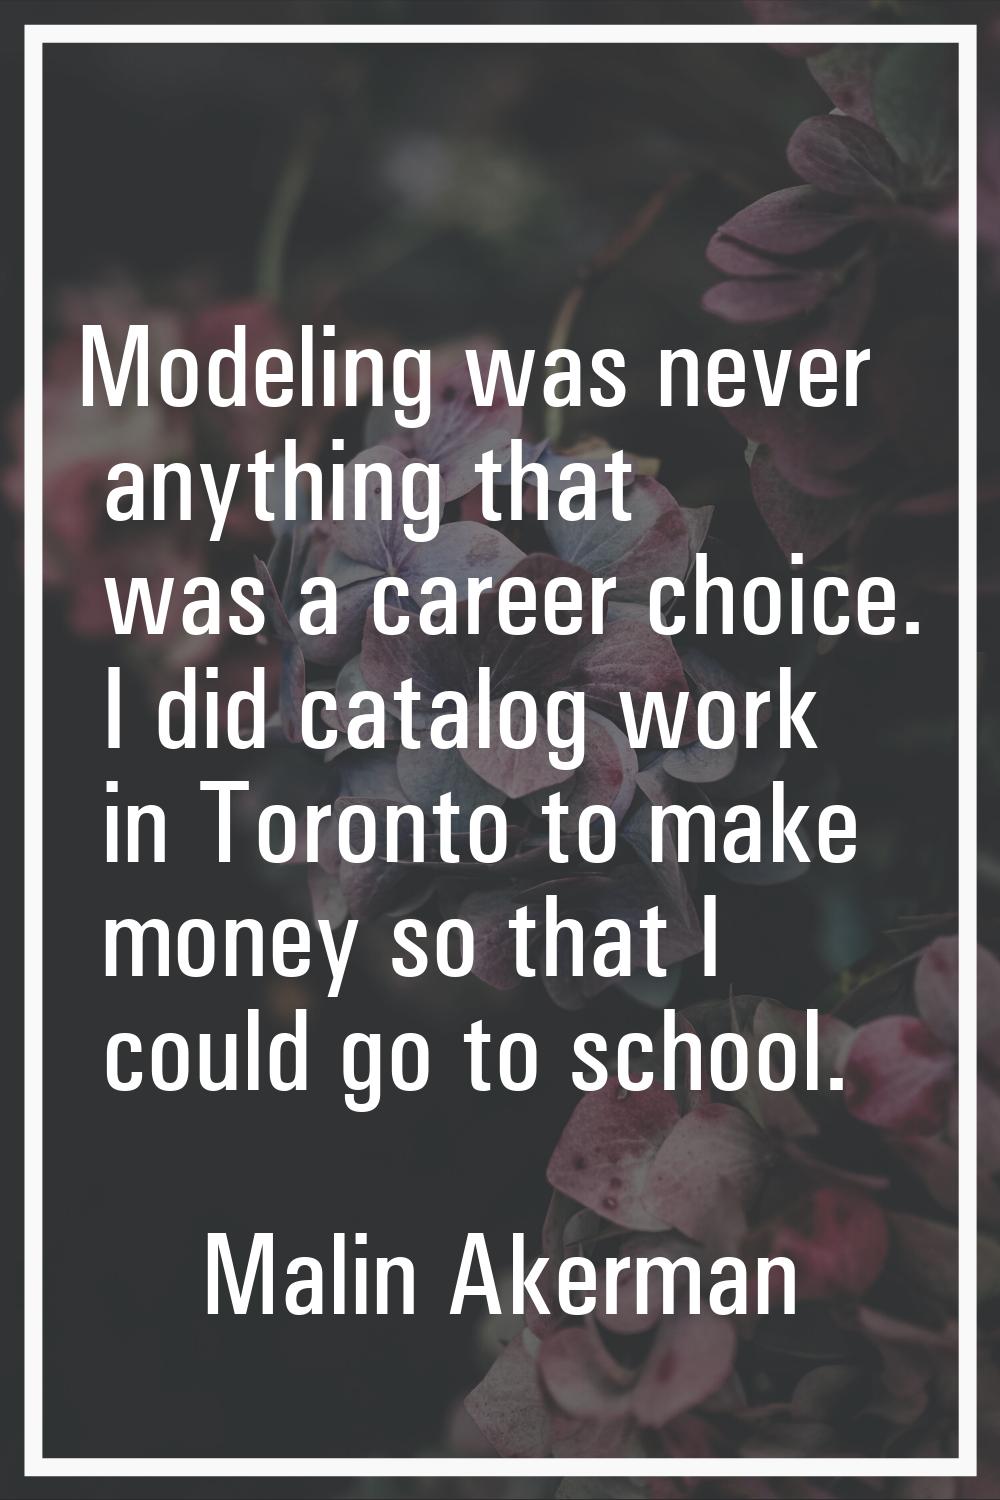 Modeling was never anything that was a career choice. I did catalog work in Toronto to make money s